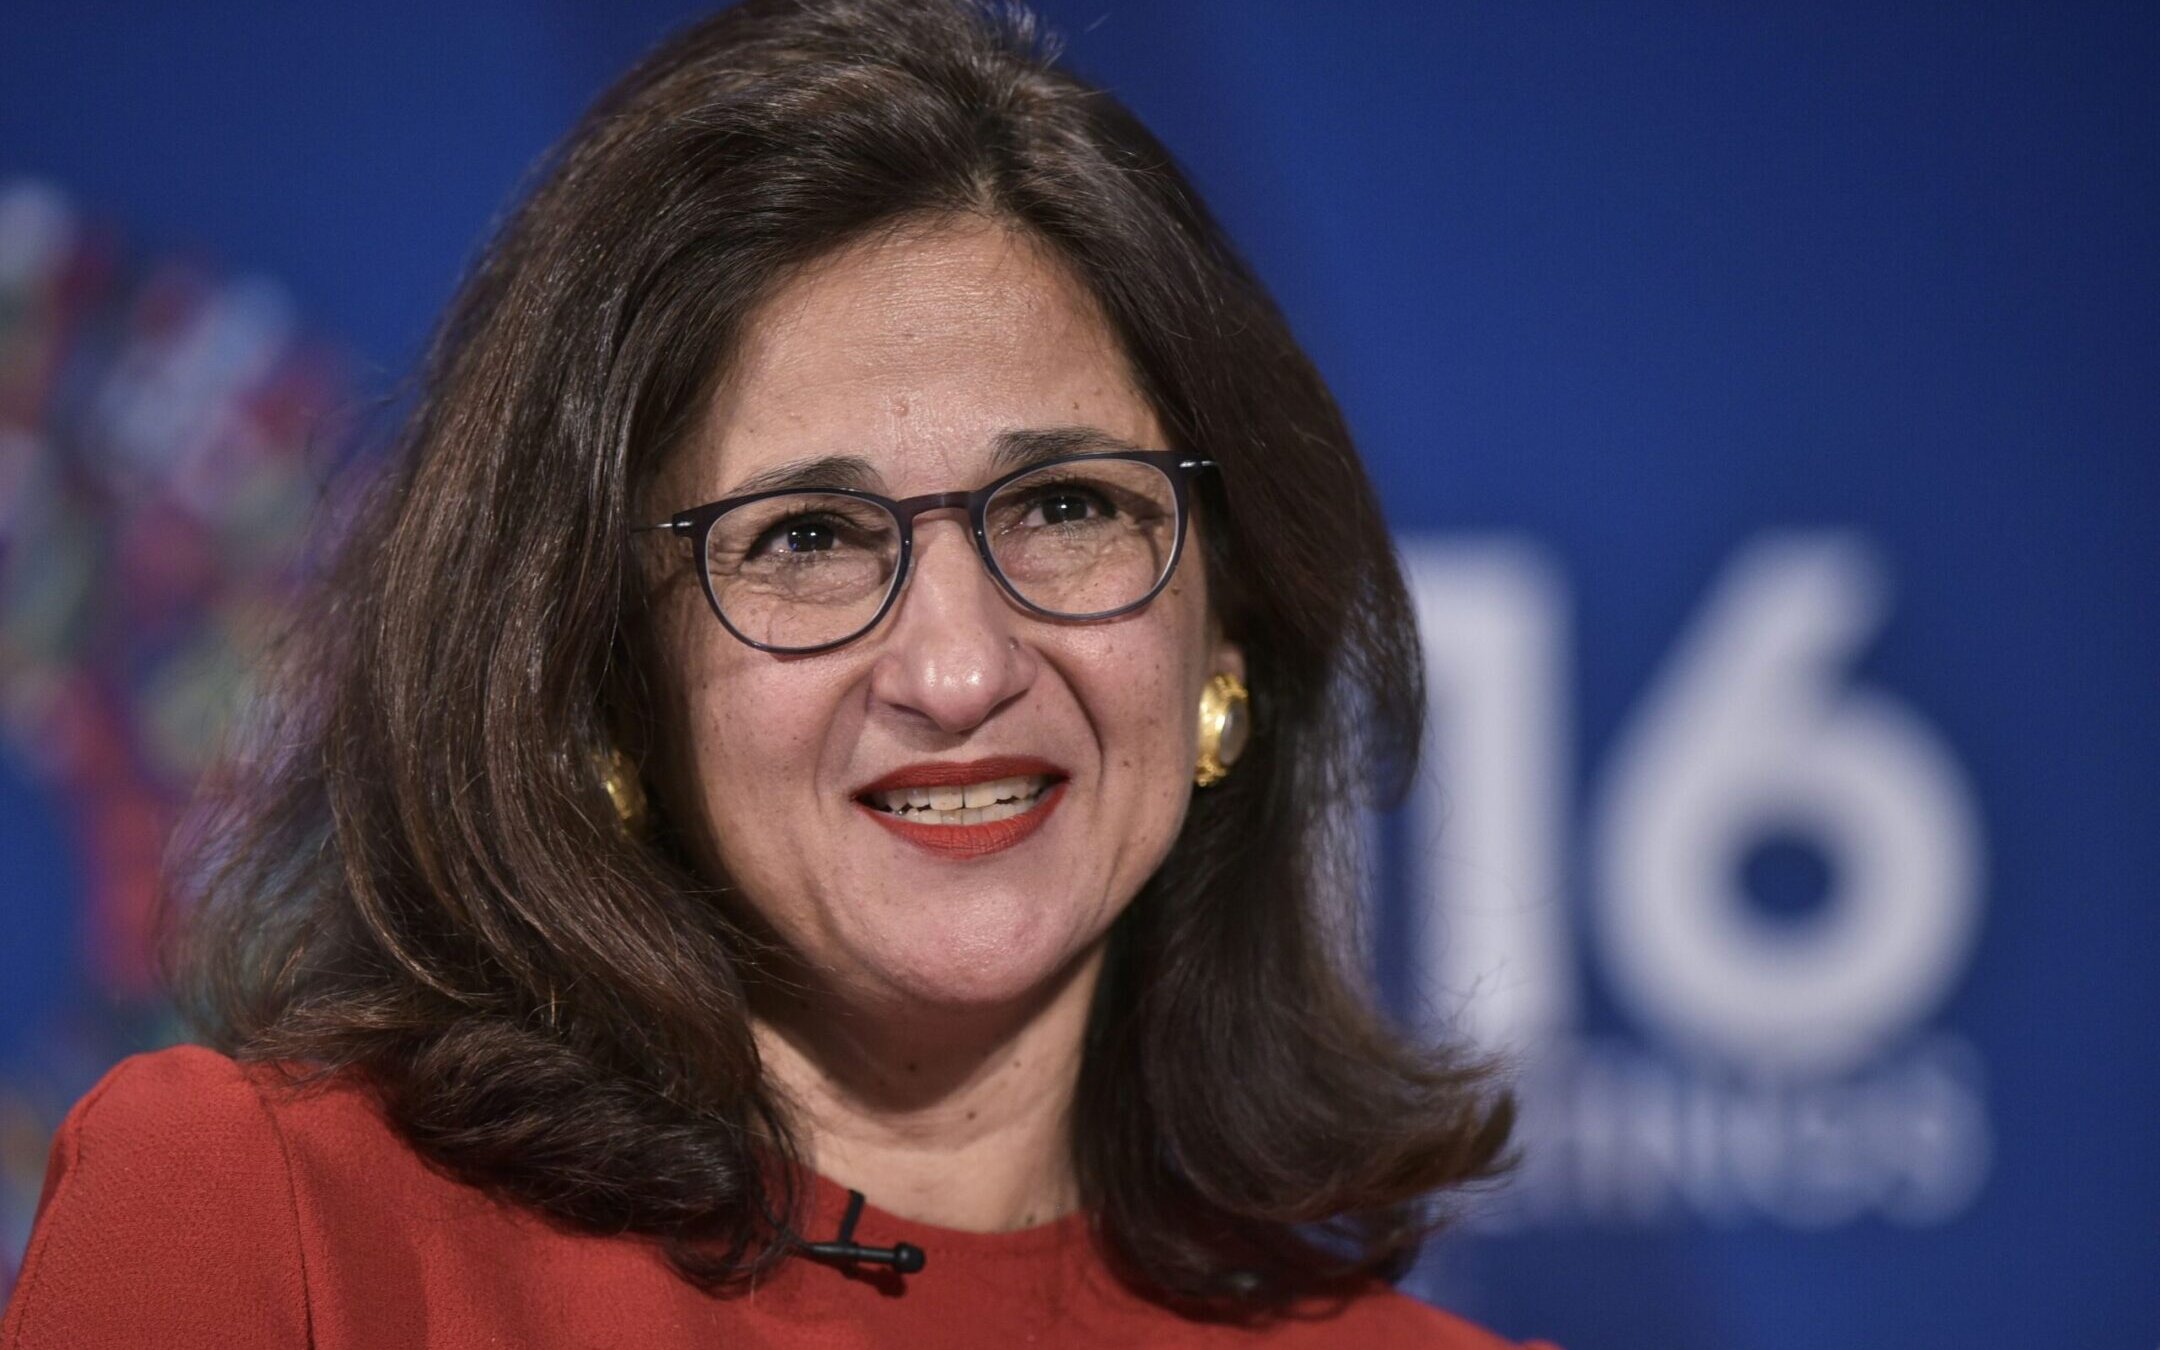 Nemat Shafik, then Bank of England deputy governor, speaks during a discussion during the 2016 International Monetary Fund, World Bank spring meetings, April 14, 2016 in Washington, D.C. Mandel Ngan/AFP via Getty Images)